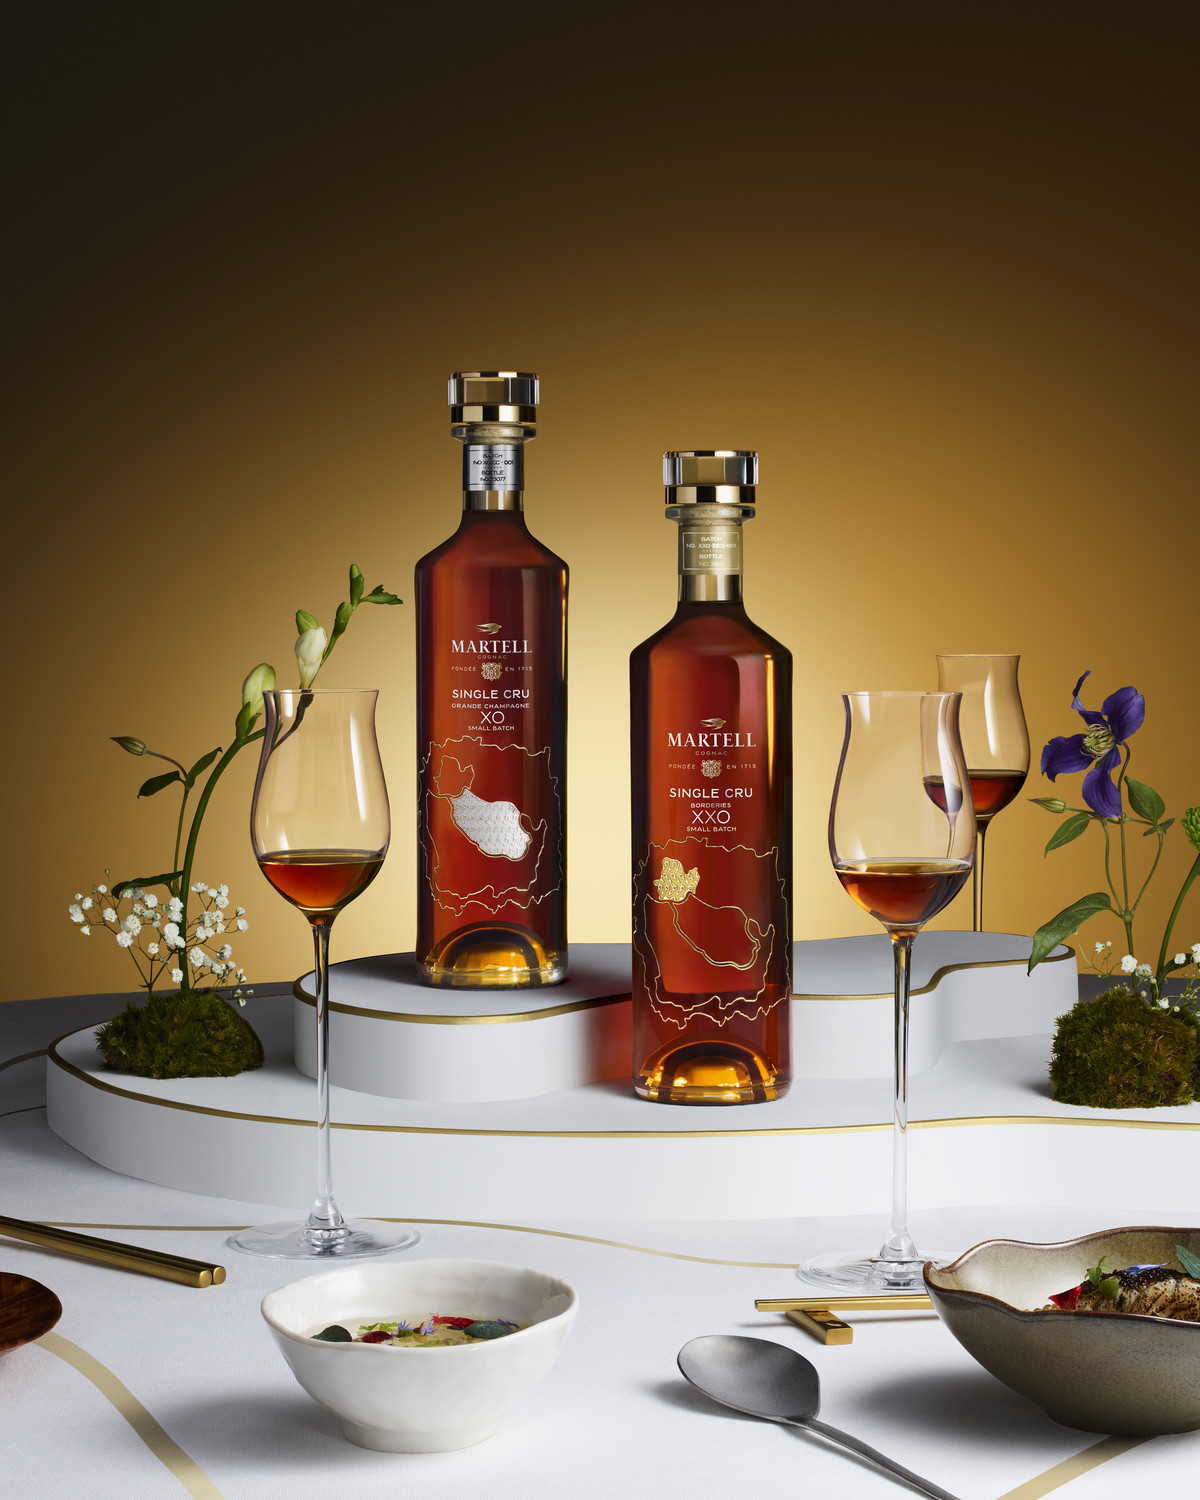 Martell Single Cru Collection, sHOT BY JEAN-MARIE BINET - © artifices